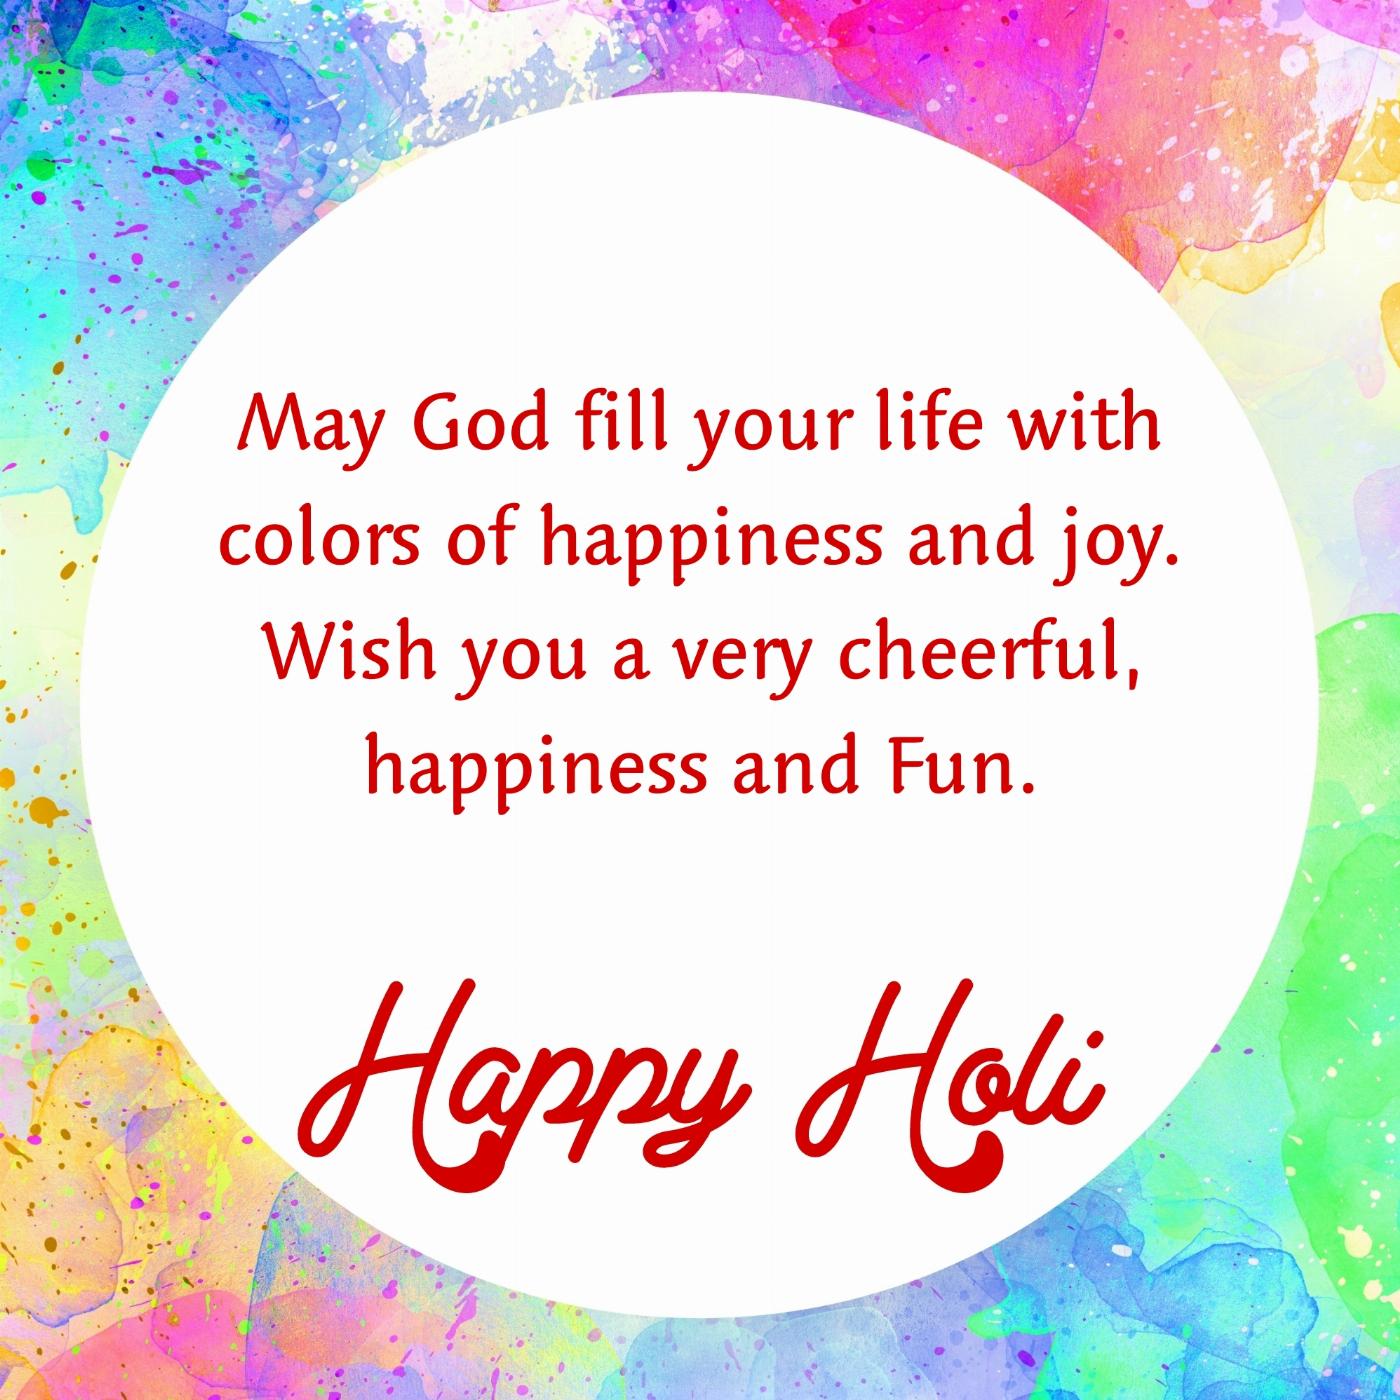 May God fill your life with colors of happiness and joy